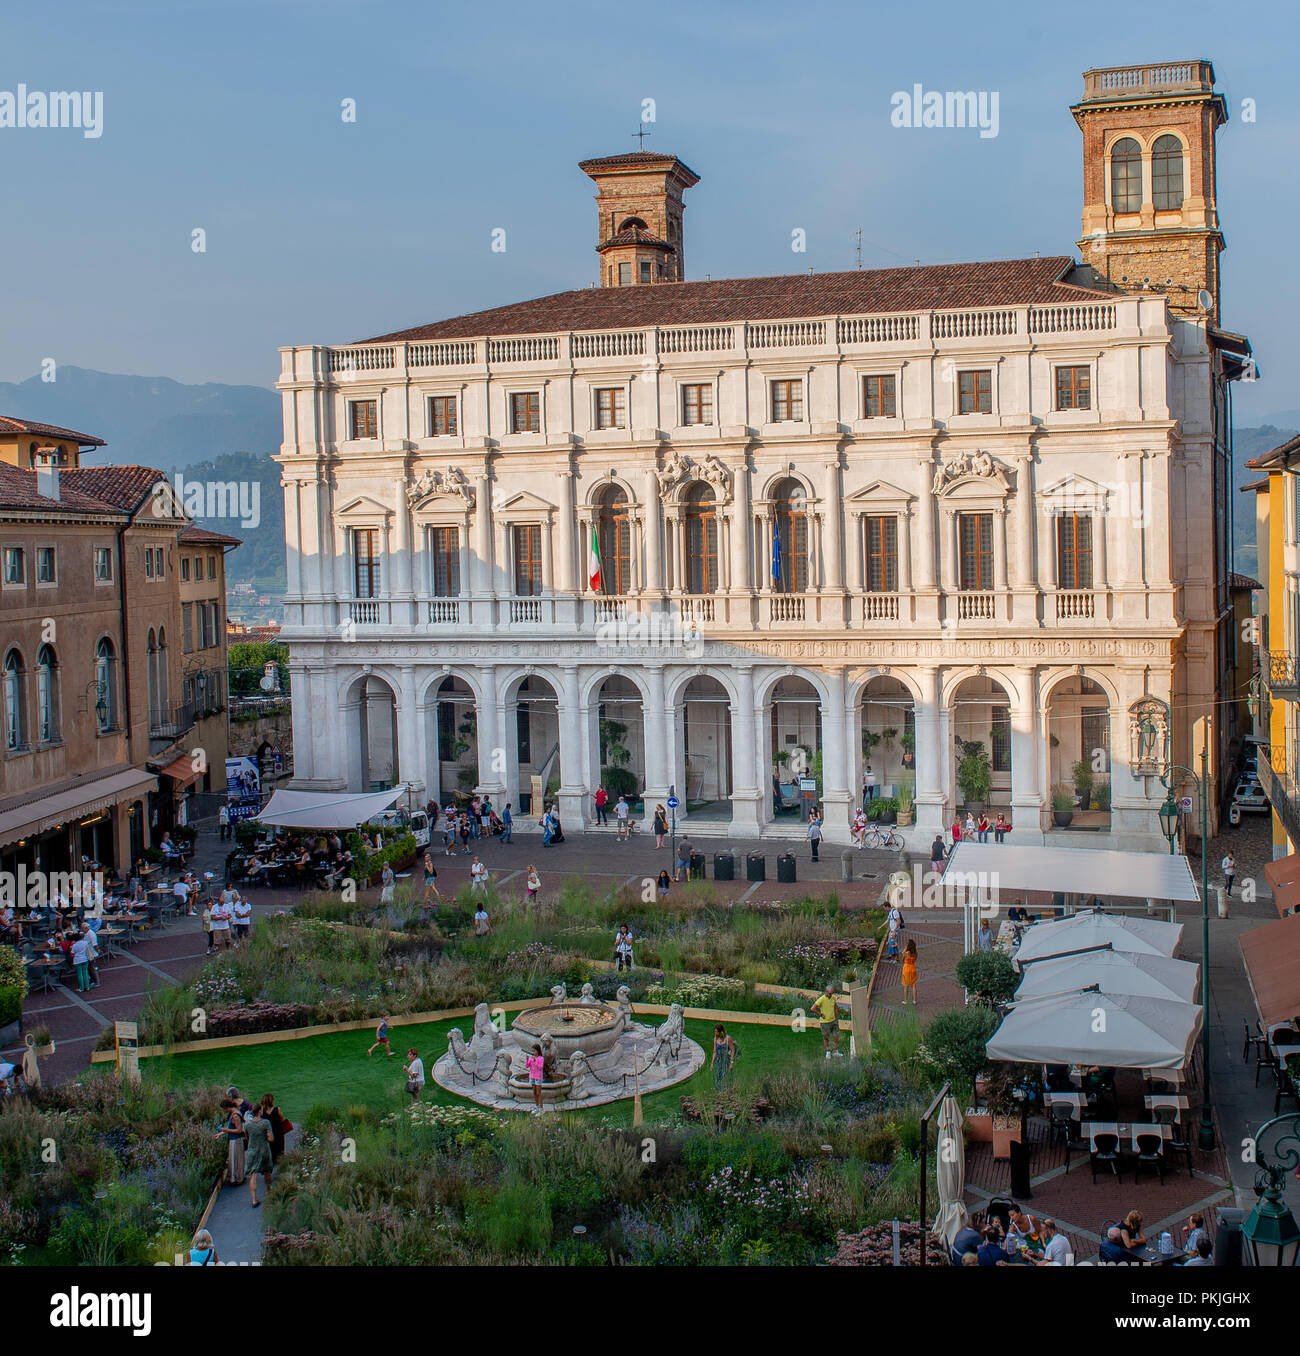 Bergamo Italy September 11 th 2018: Bergamo Old Town in a high-rise city transformed into a botanical garden for the masters of the landscape Stock Photo